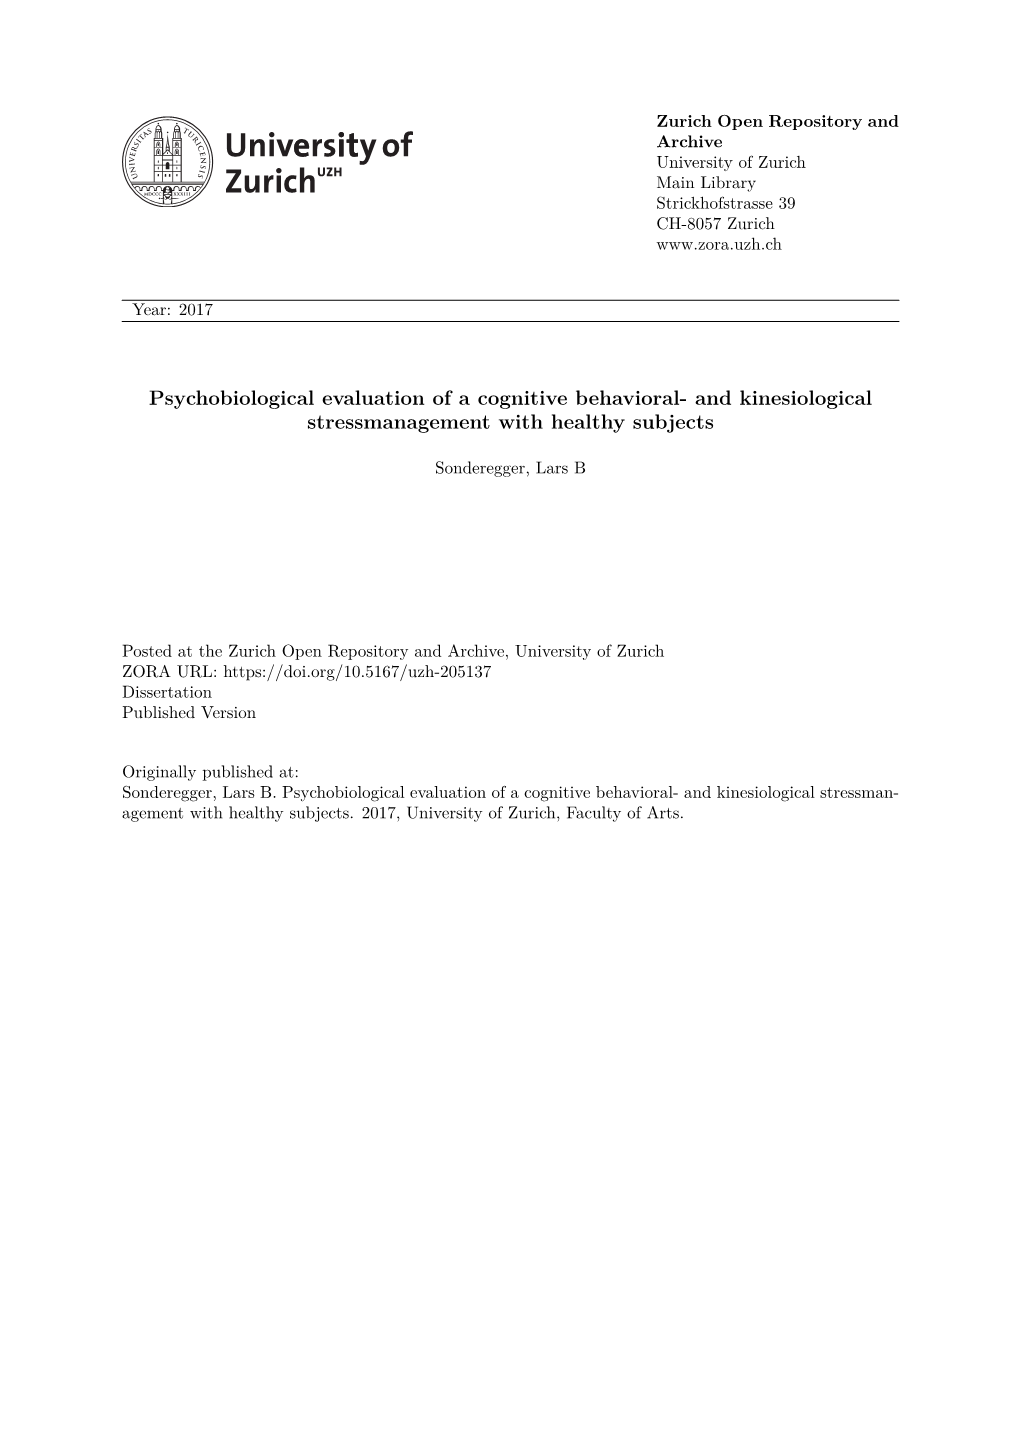 Psychobiological Evaluation of a Cognitive Behavioral- and Kinesiological Stressmanagement with Healthy Subjects